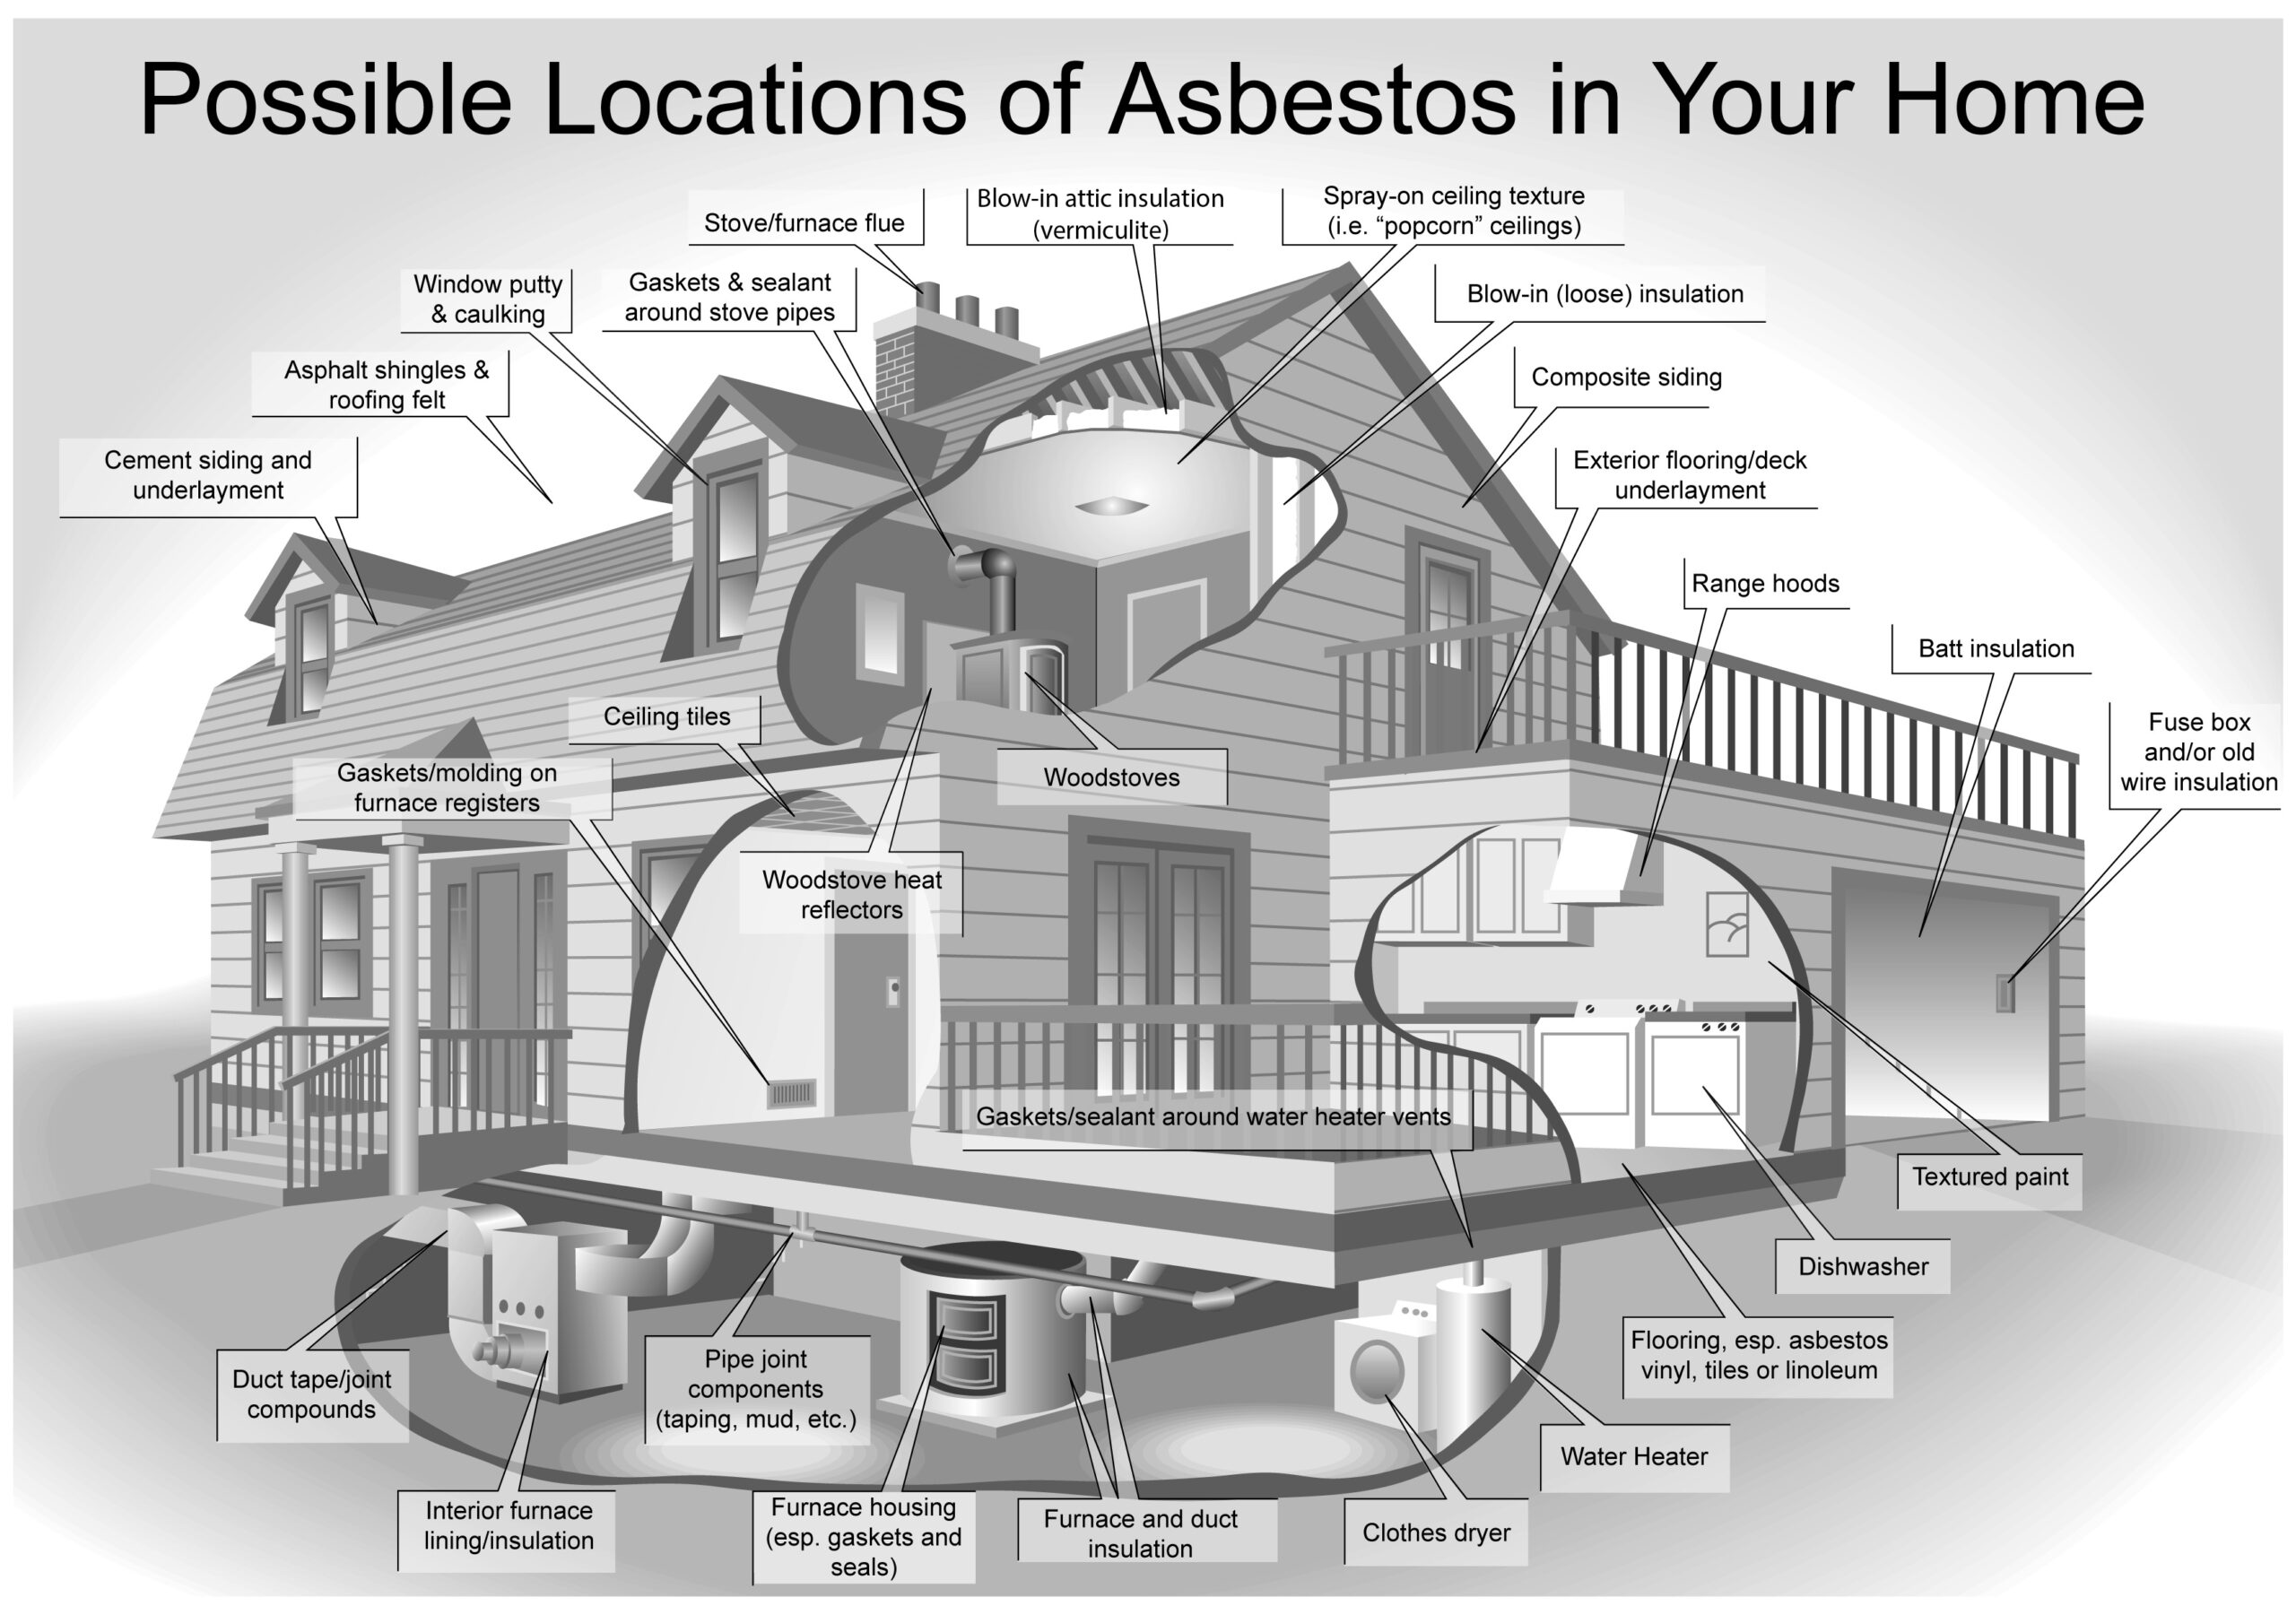 Graphic drawing showing a home with cut-away walls and labels showing various locations where asbestos materials could be found.